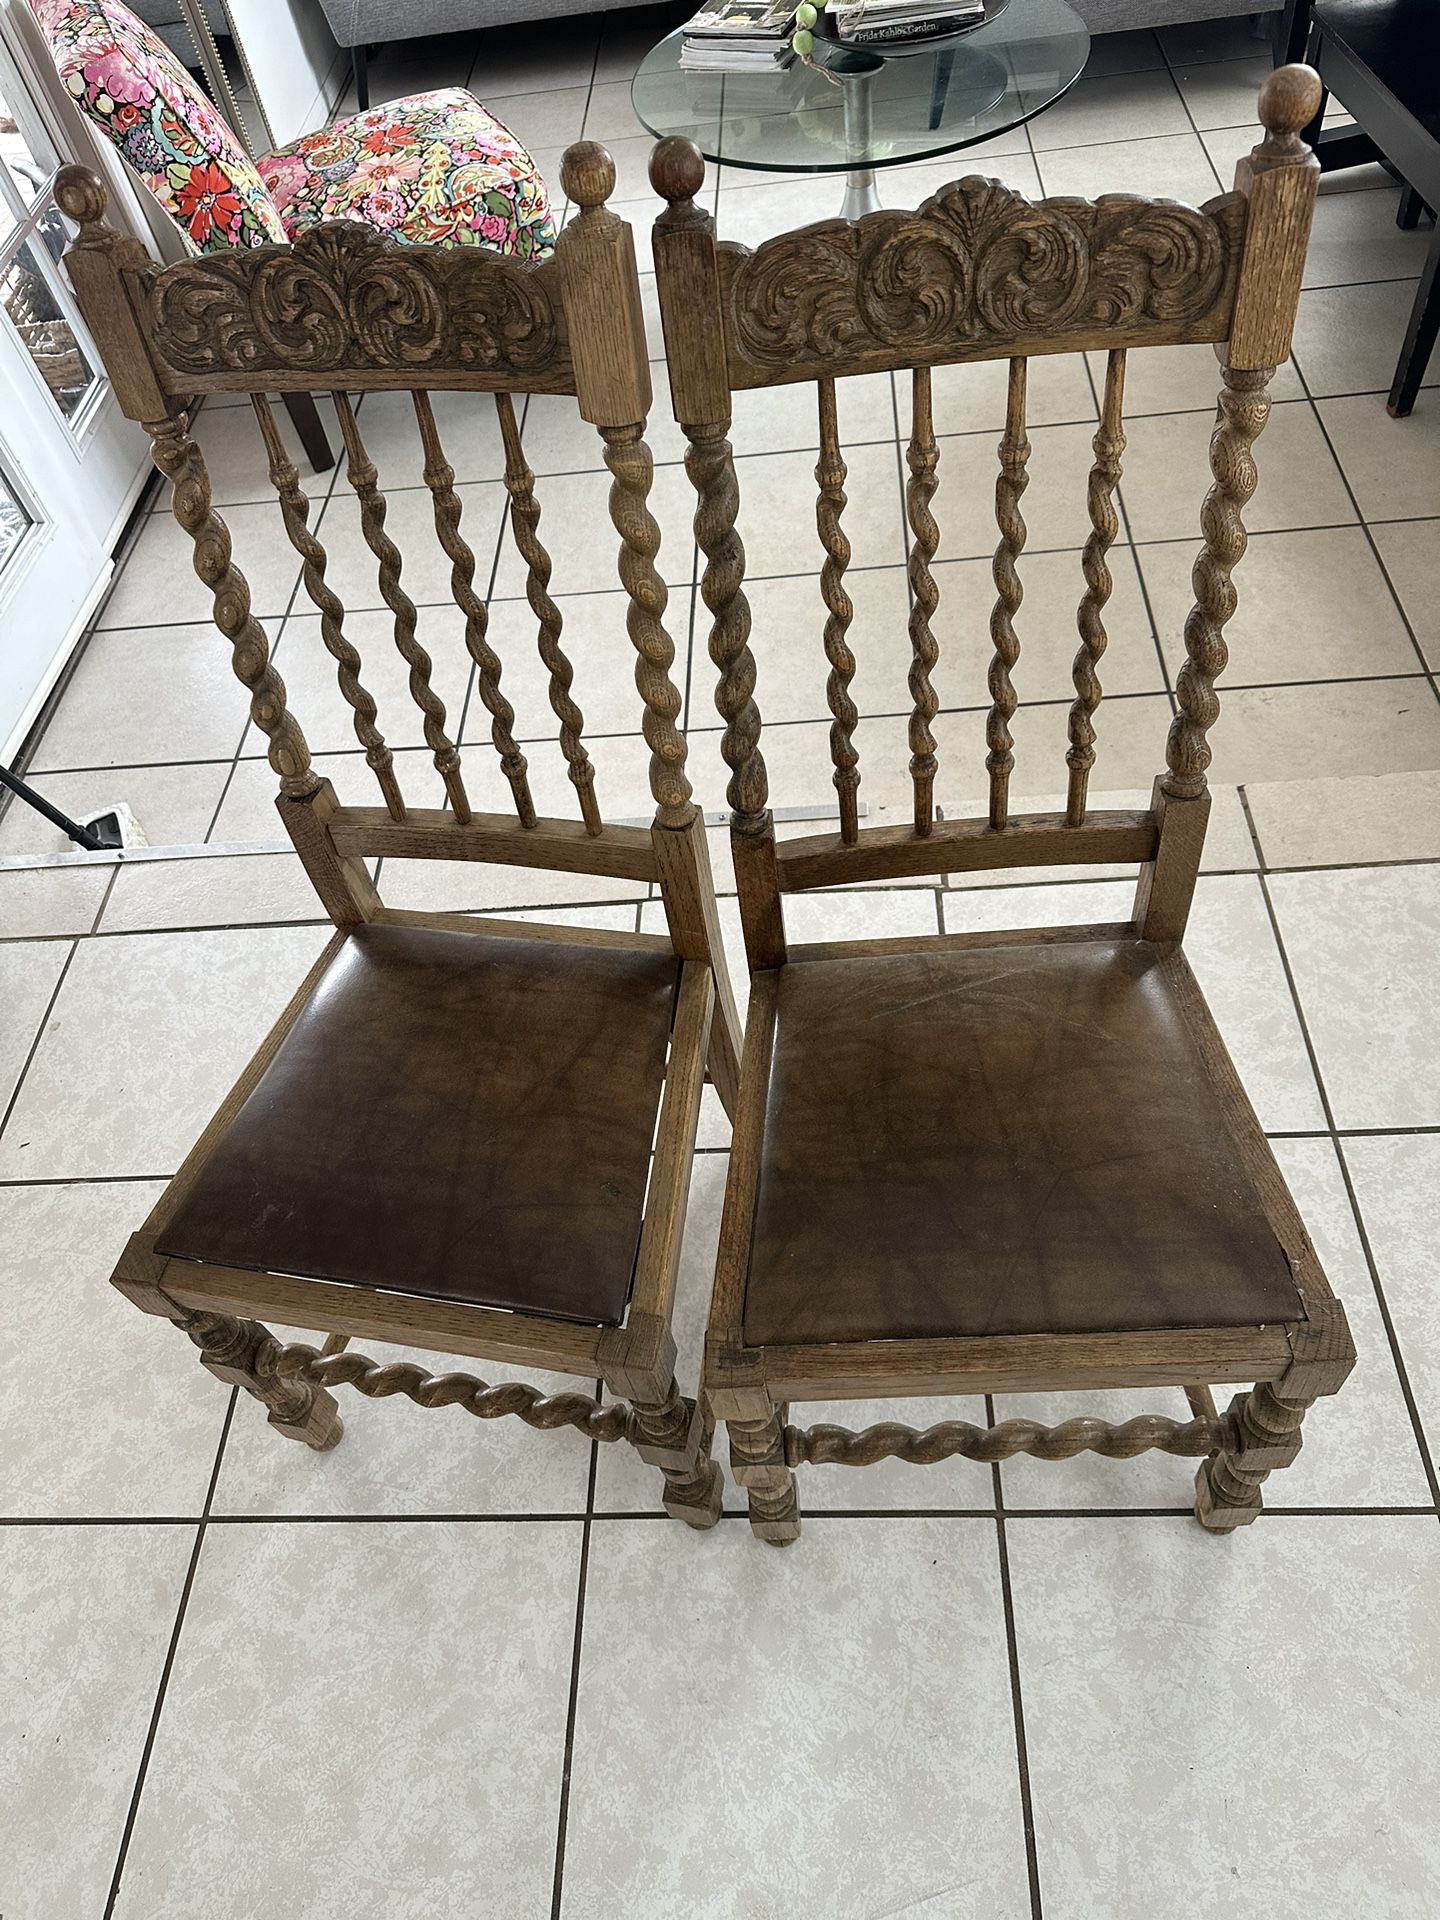 H. W. Hull & Sons - Antique Oak Chairs - Solid Oak Spindle Chair, Antique Quality Oak $100 OBO 